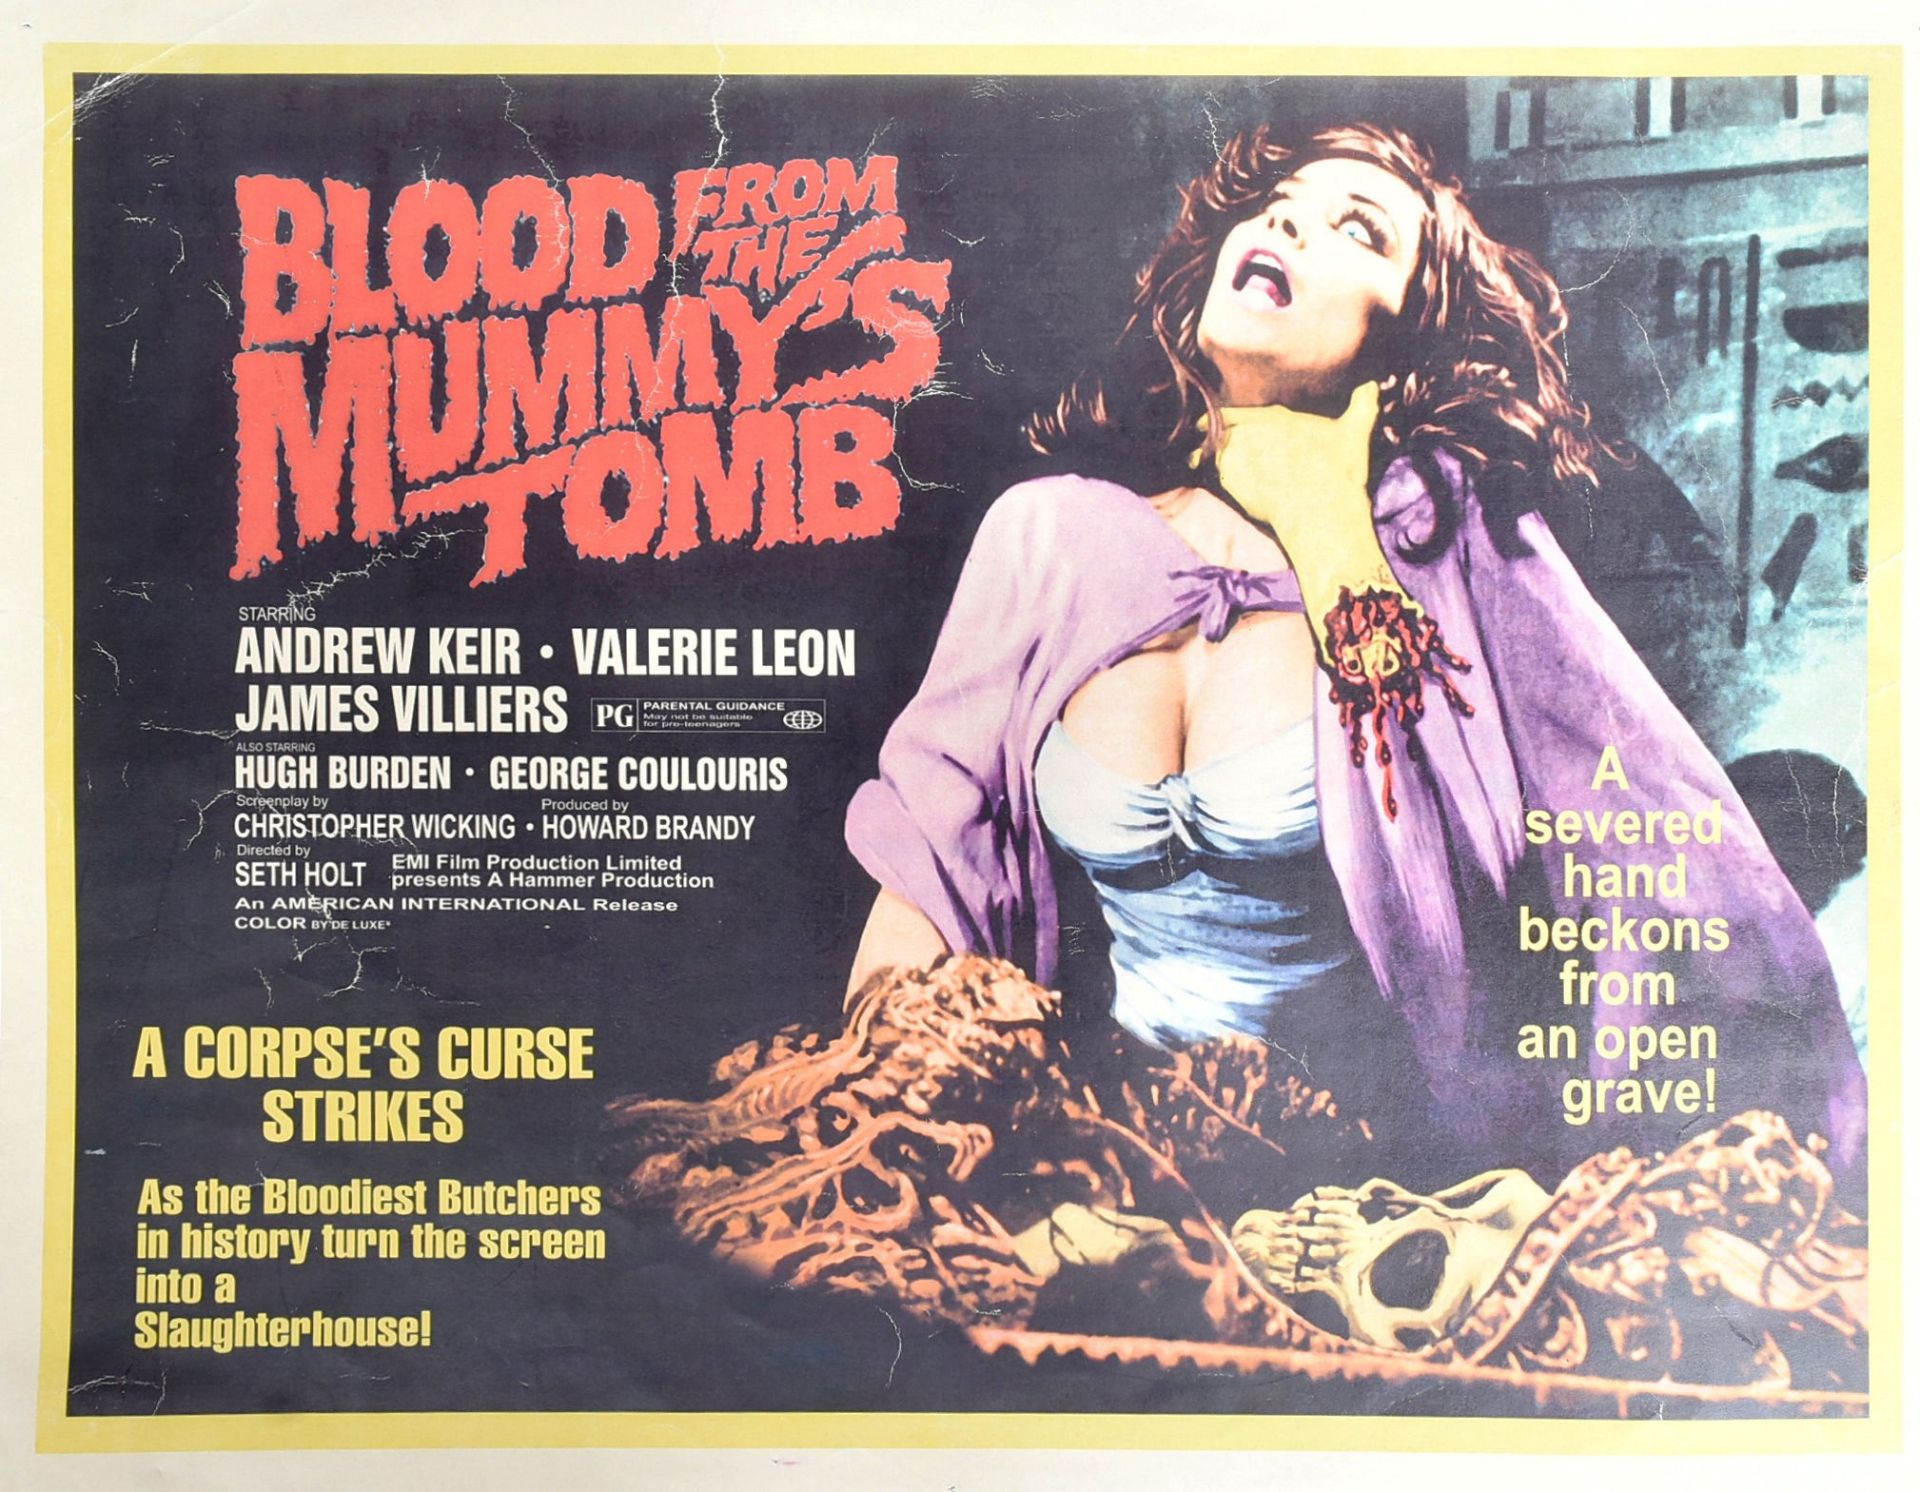 BLOOD FROM THE MUMMY'S TOMB (1971) - COLLECTION OF MEMORABILIA - Image 3 of 5